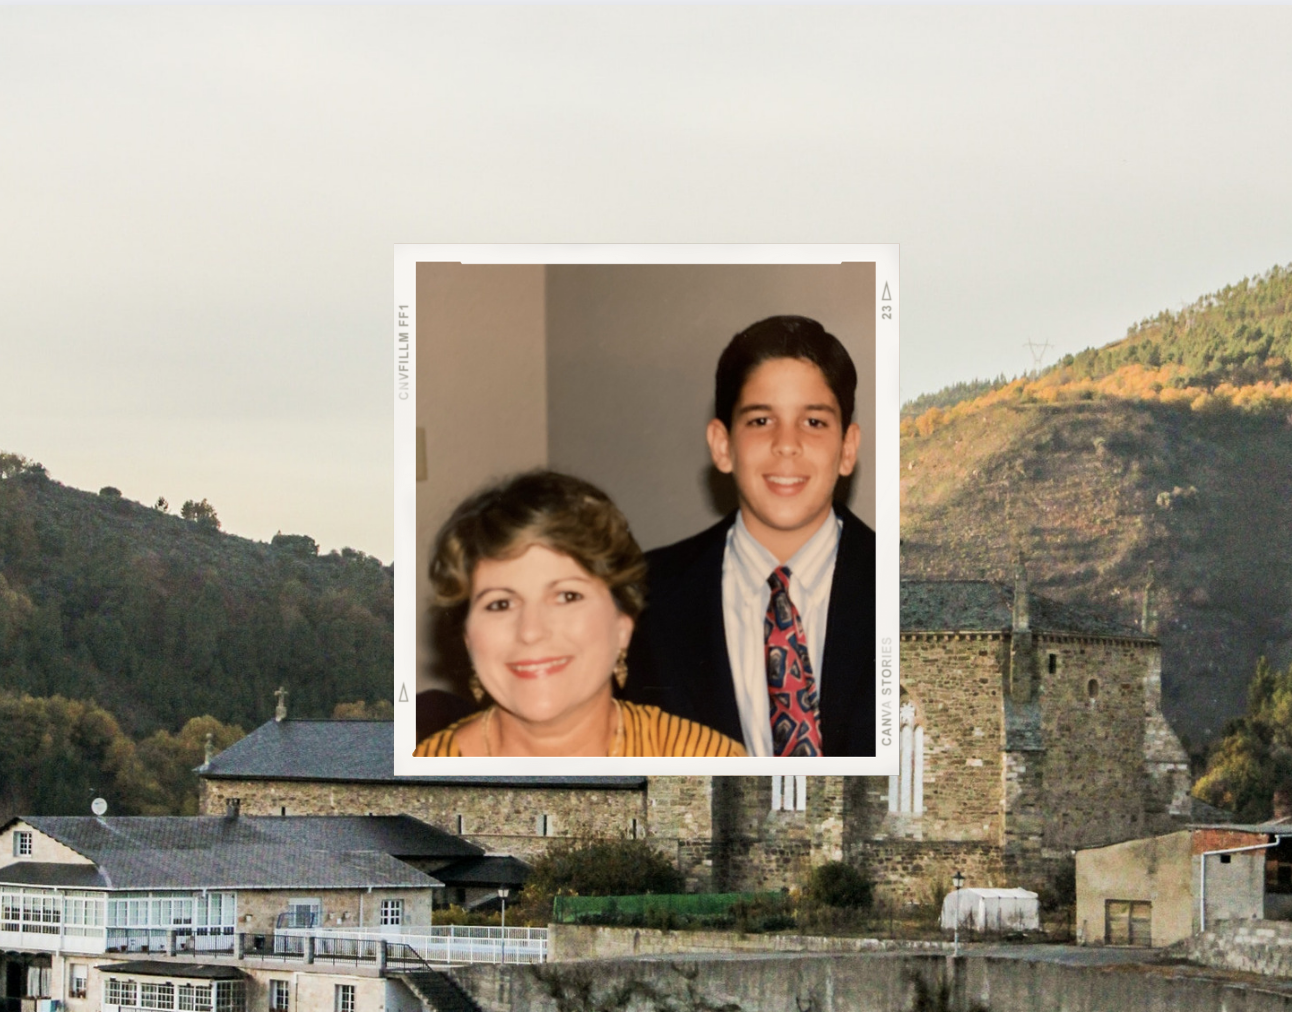 photo of son and mother to place inside lapel pin with photograph